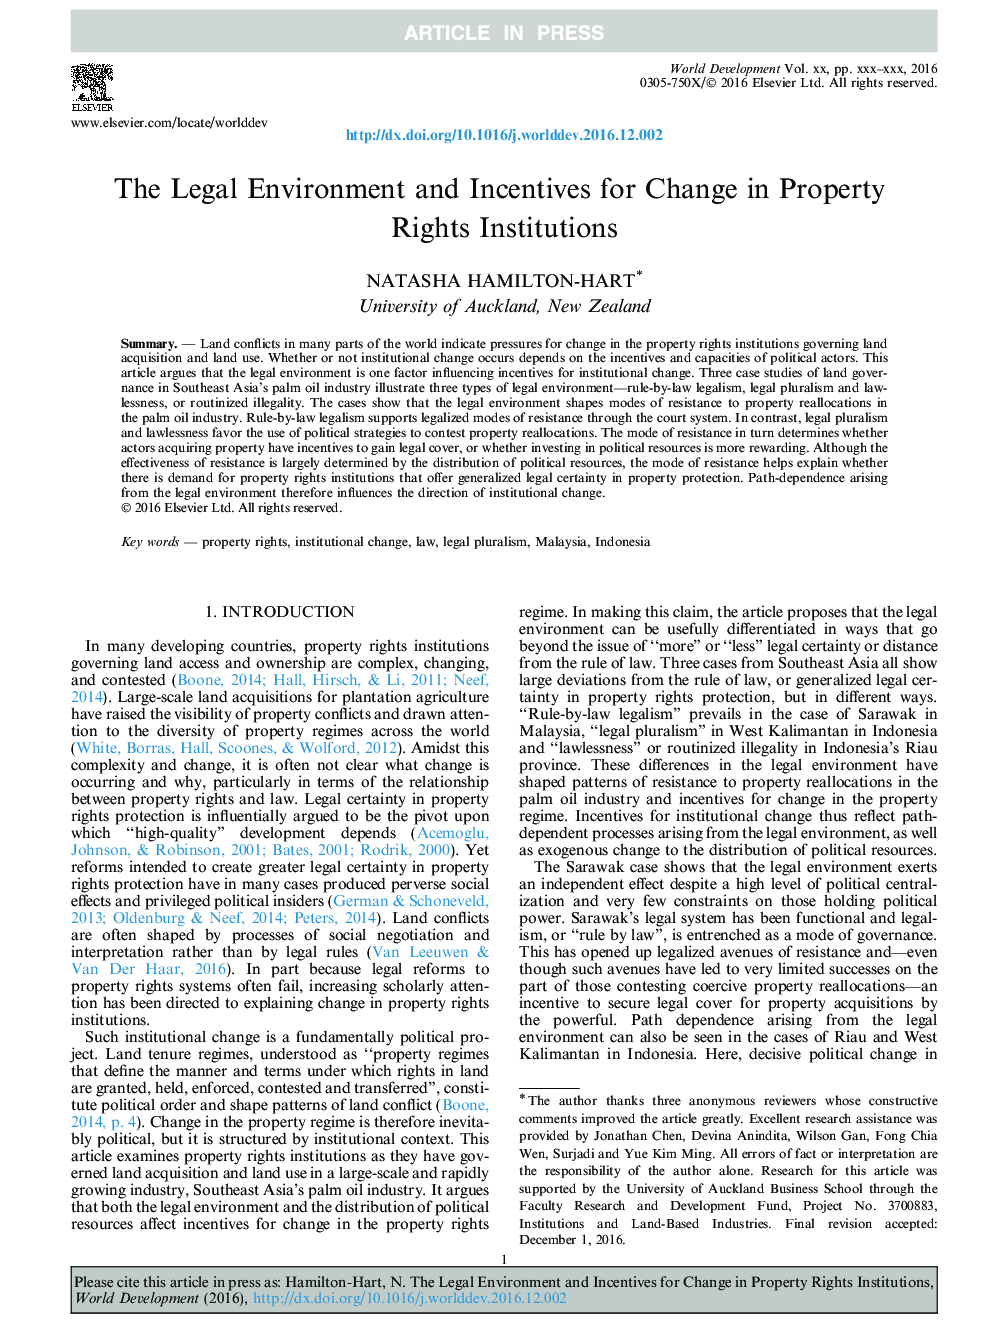 The Legal Environment and Incentives for Change in Property Rights Institutions